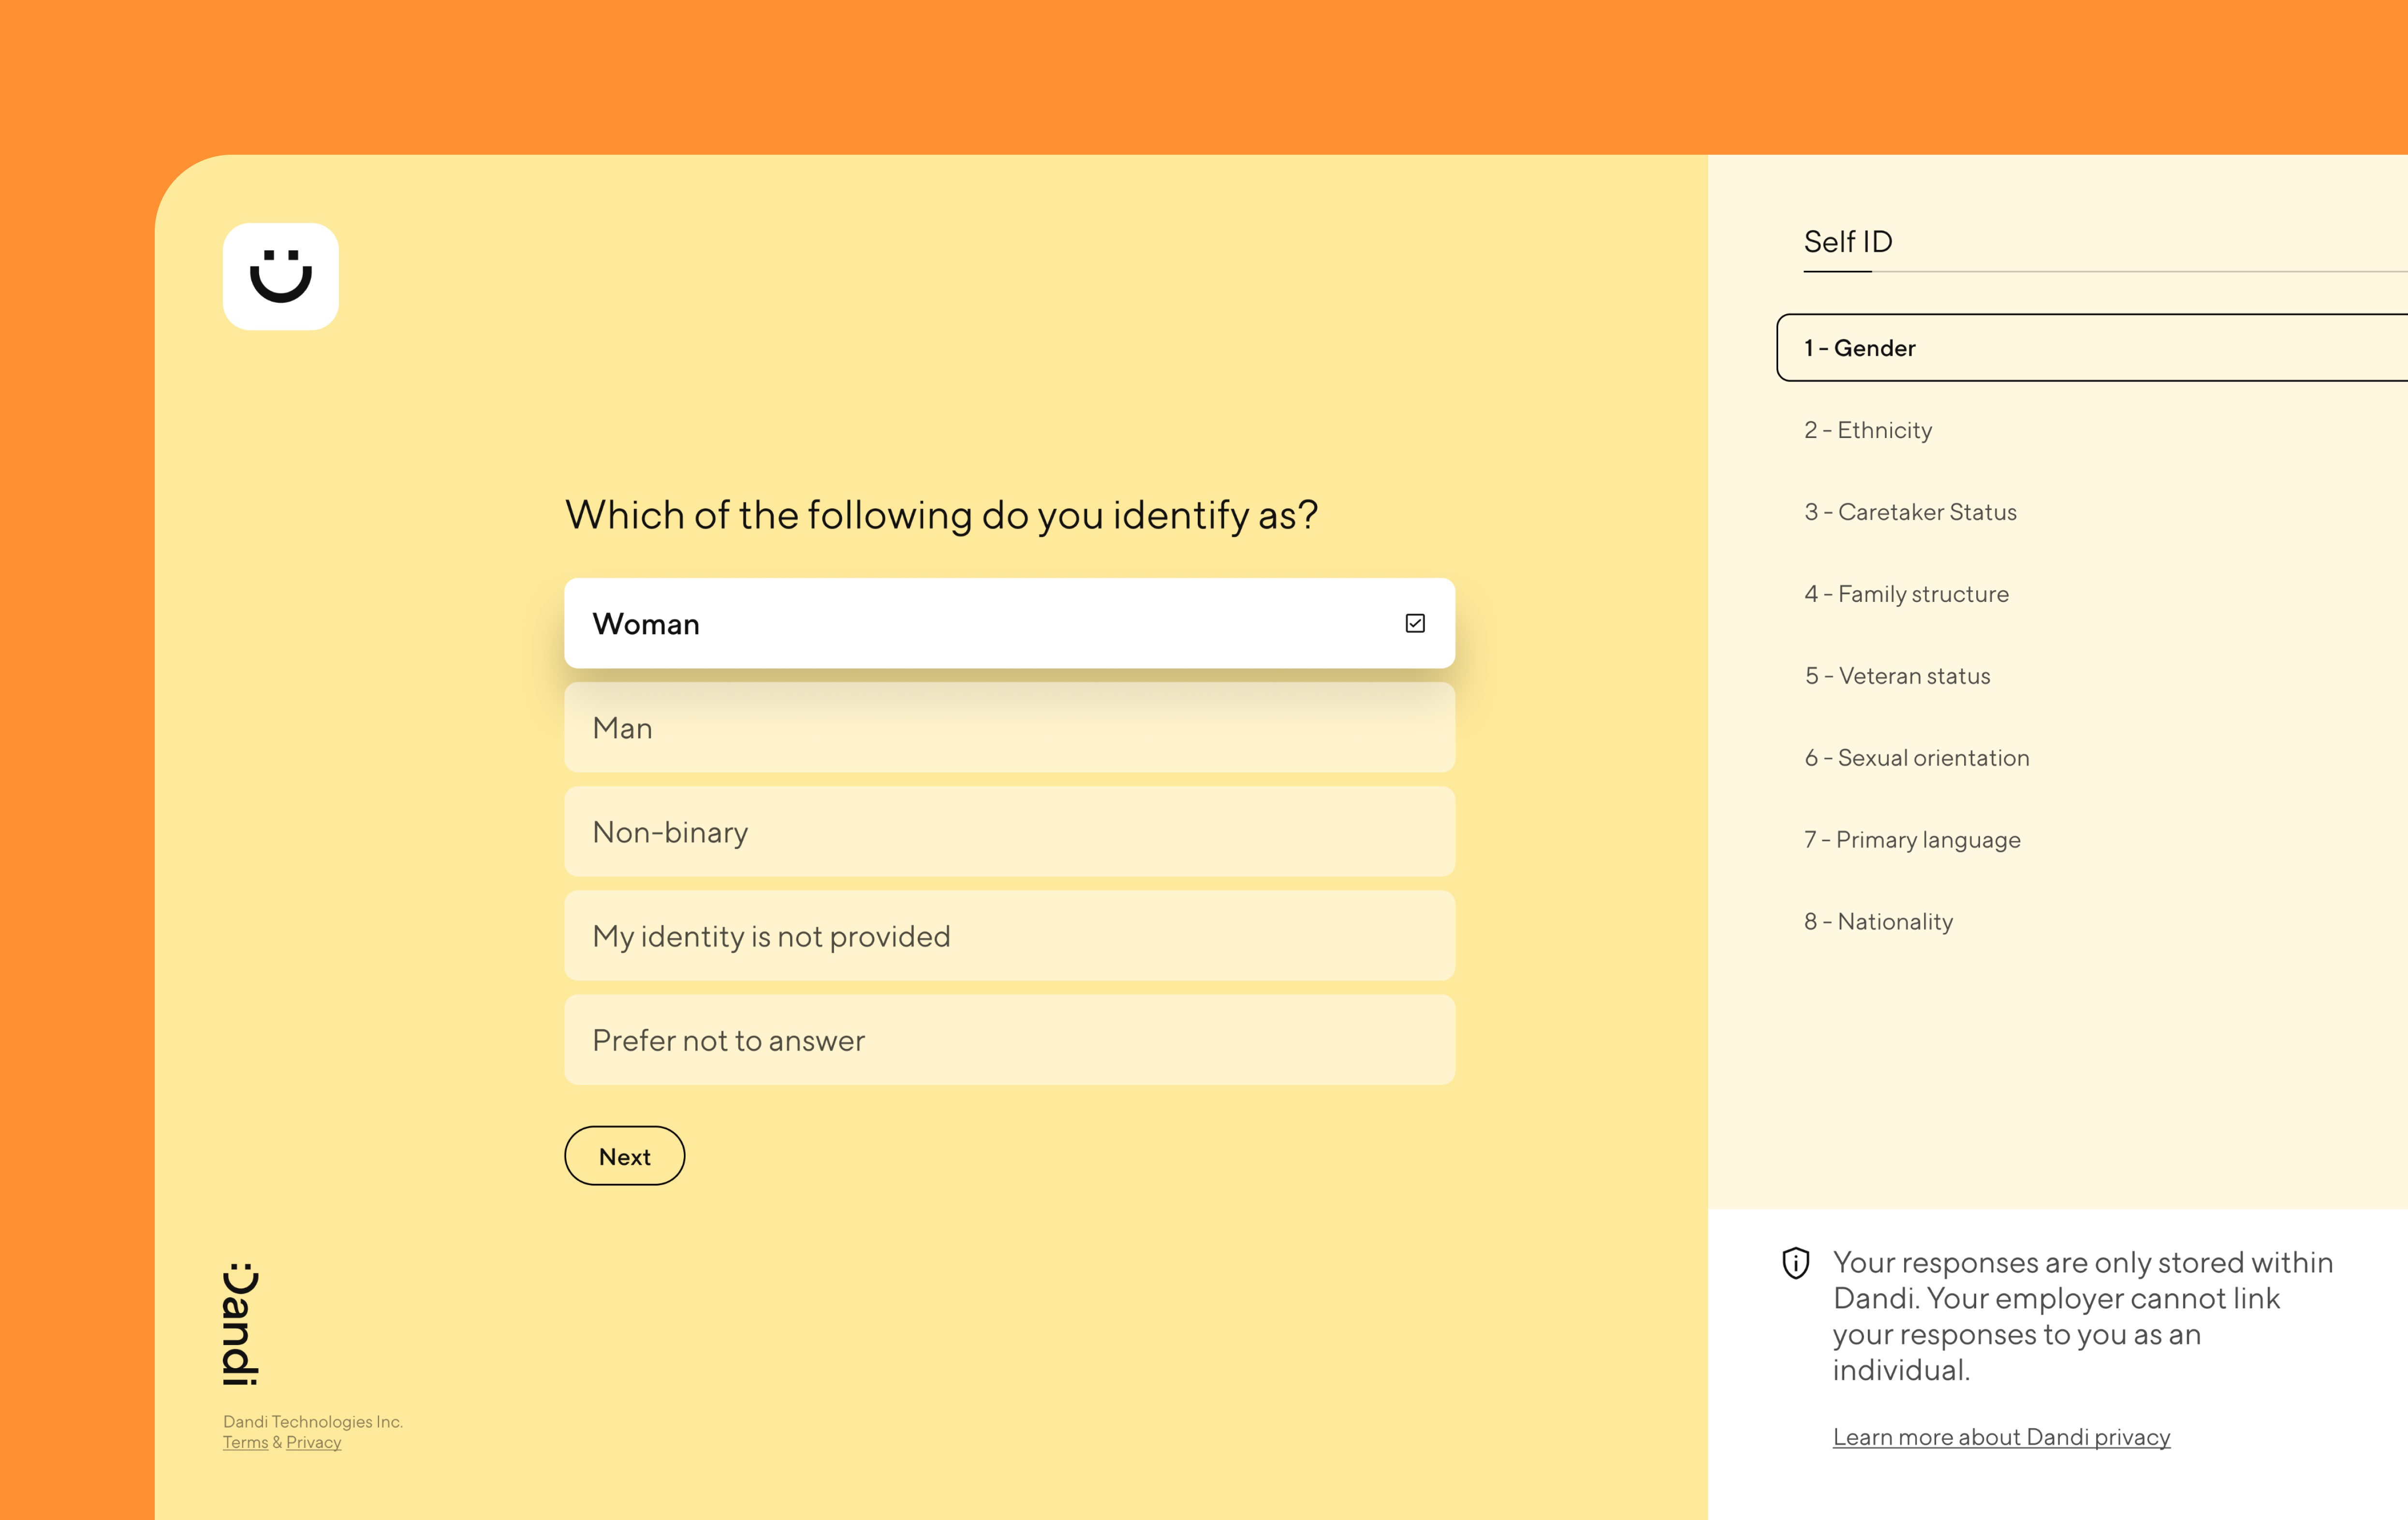 Sample Dandi Self-ID questionnaire an employee would see. The displayed question asks about gender identity. A menu on the right shows additional self-ID categories. The bottom right includes privacy information.